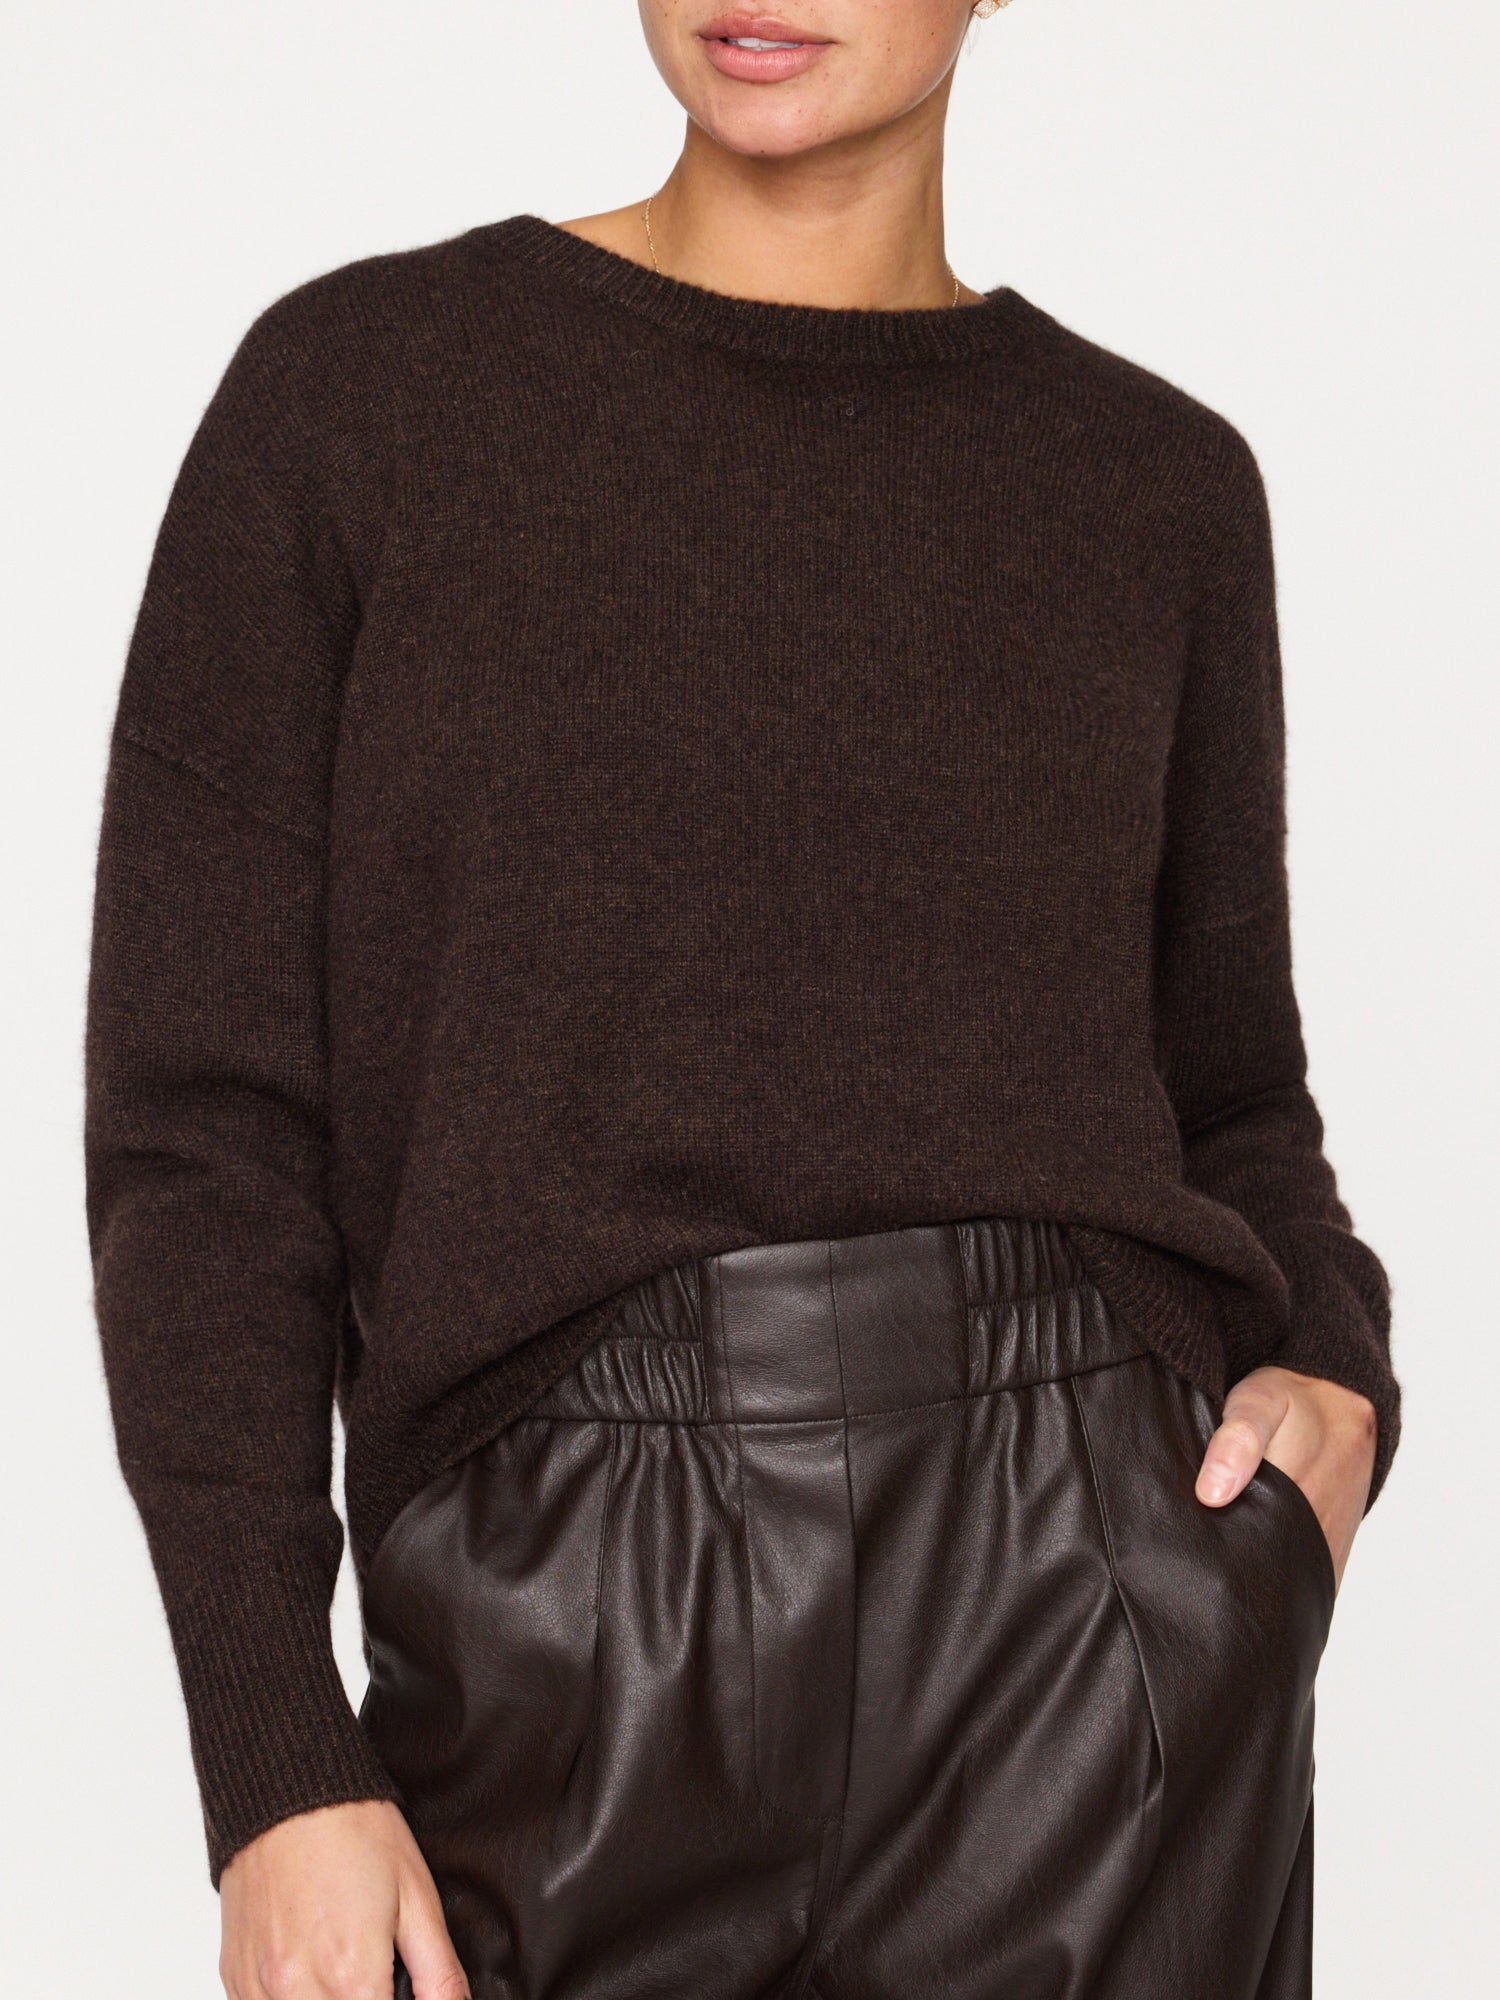 Everyday cashmere crewneck brown sweater front view 2